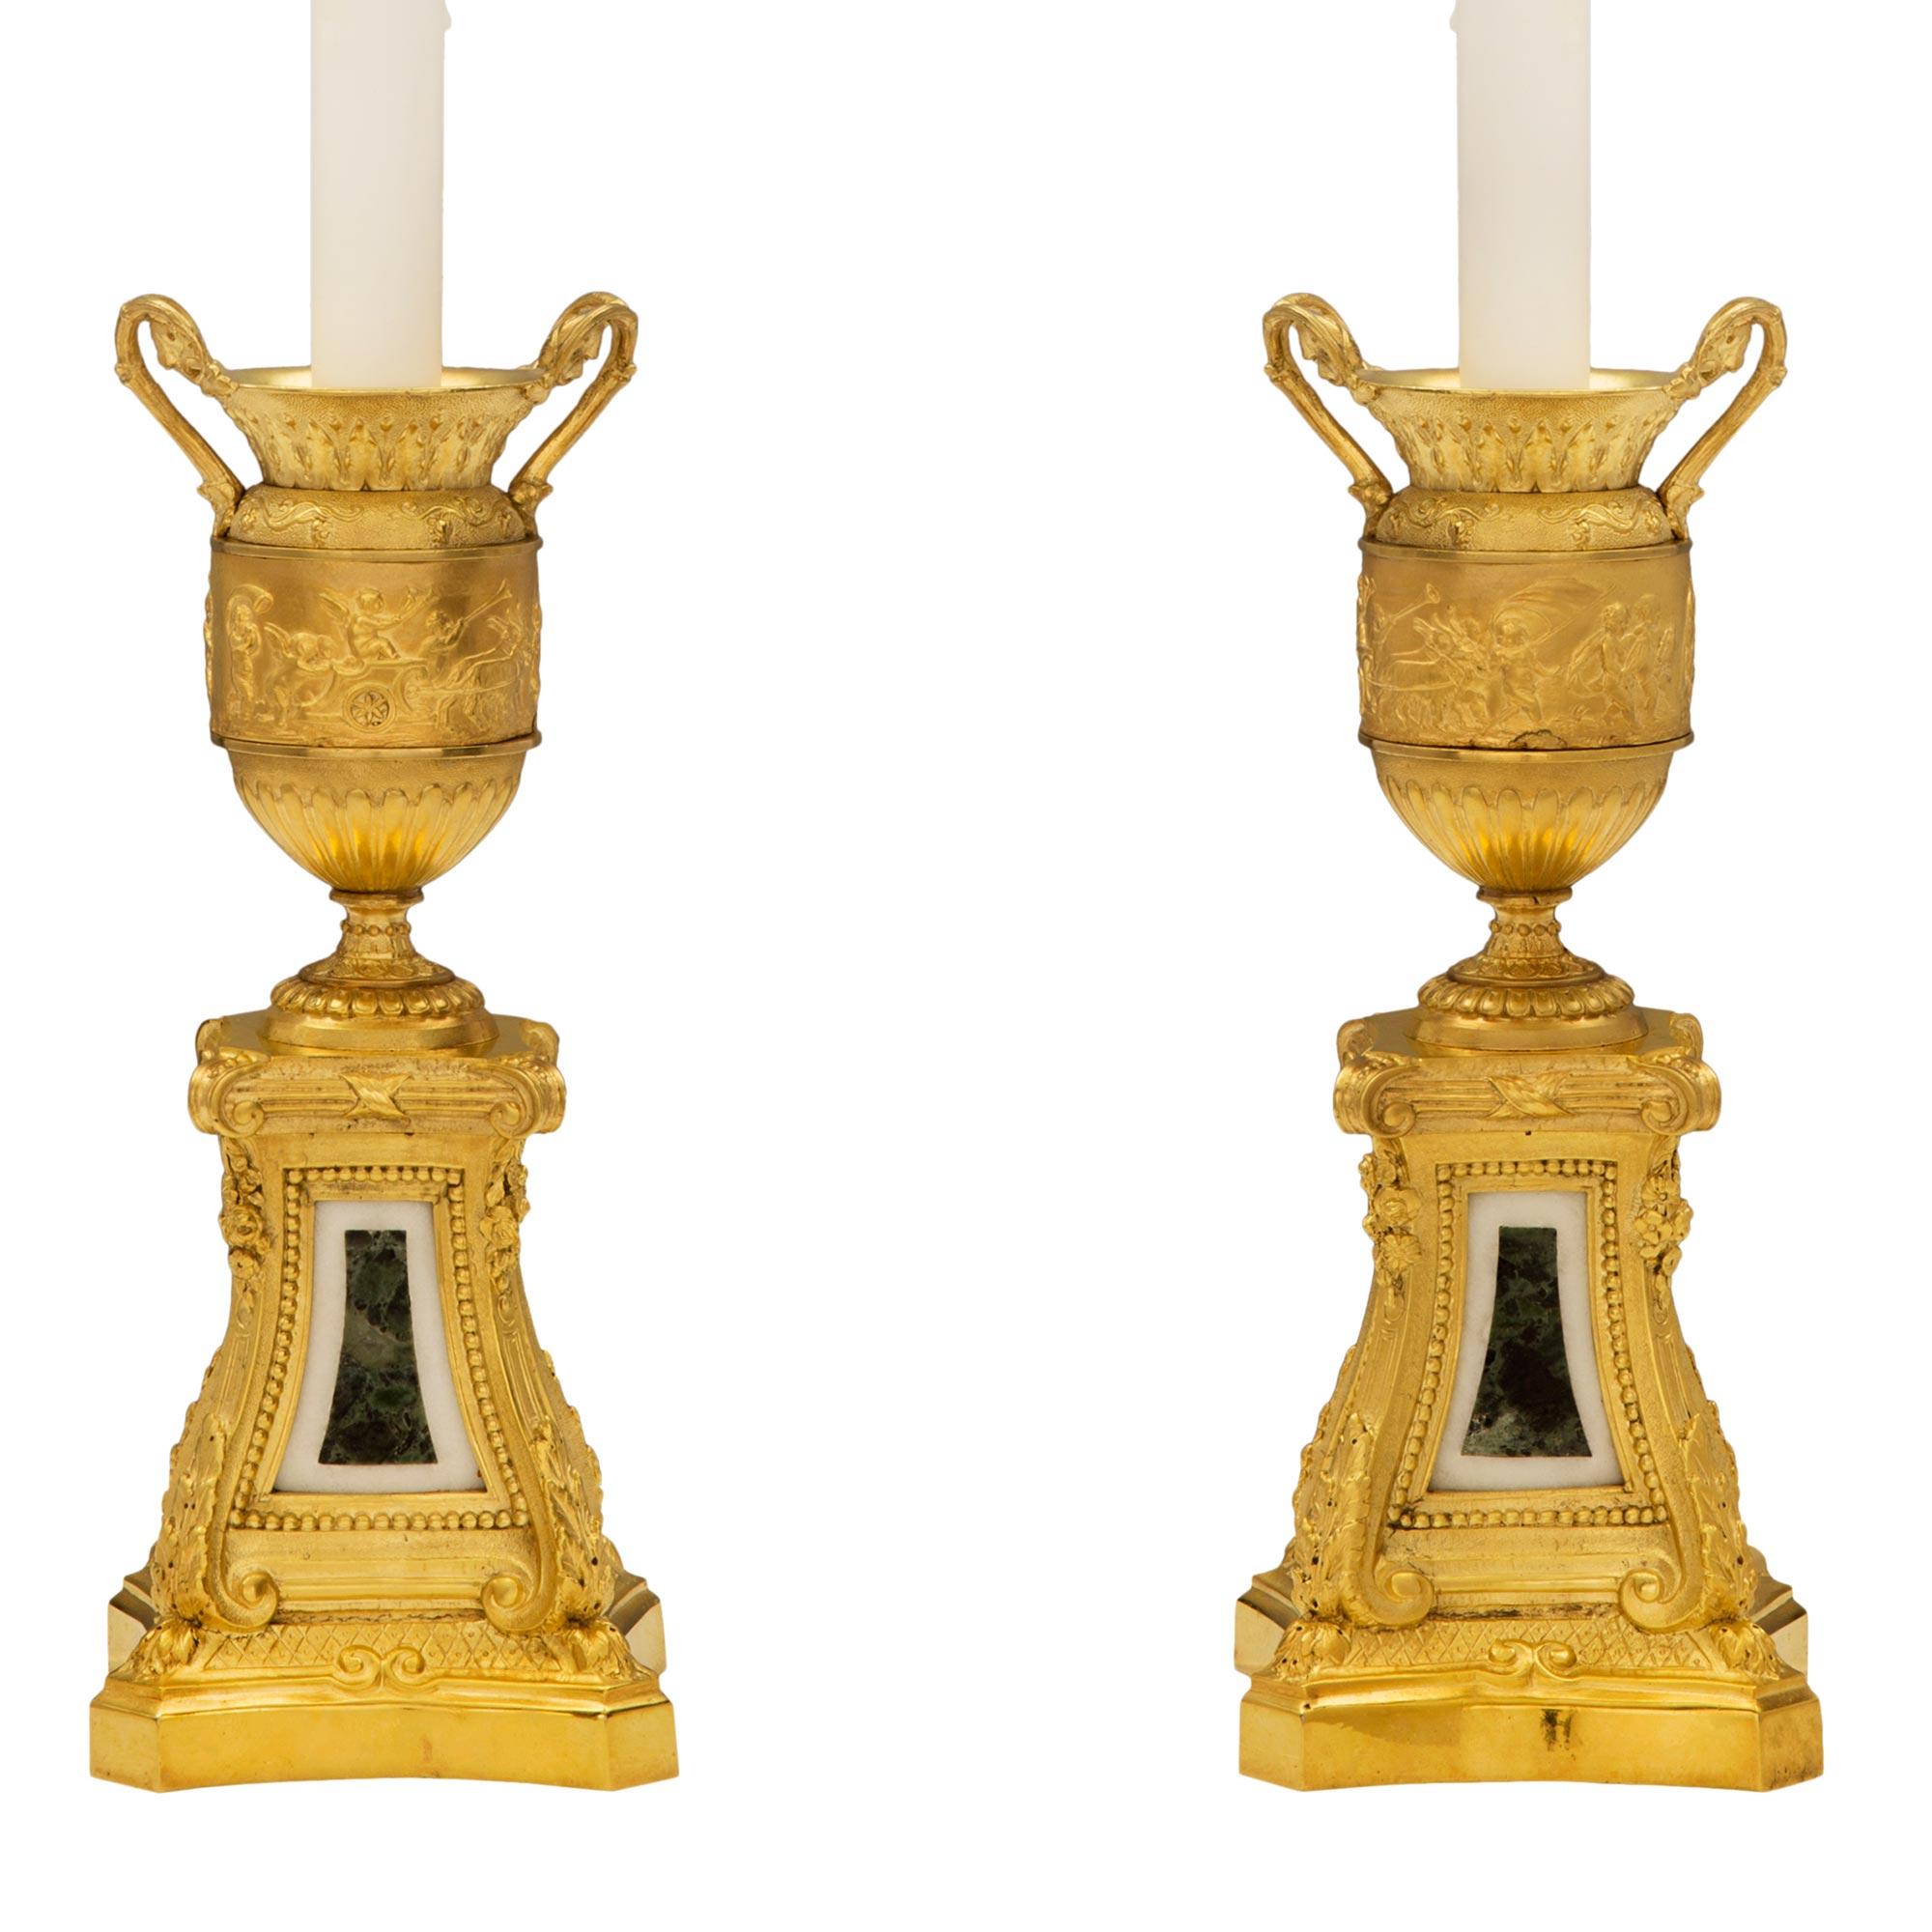 An exceptional pair of French 19th century Louis XVI st. ormolu, white Carrara marble and Vert de Patricia marble lamps after a model by Clodion. Each lamp is raised by a square base with concave sides and mottled border. The central supports